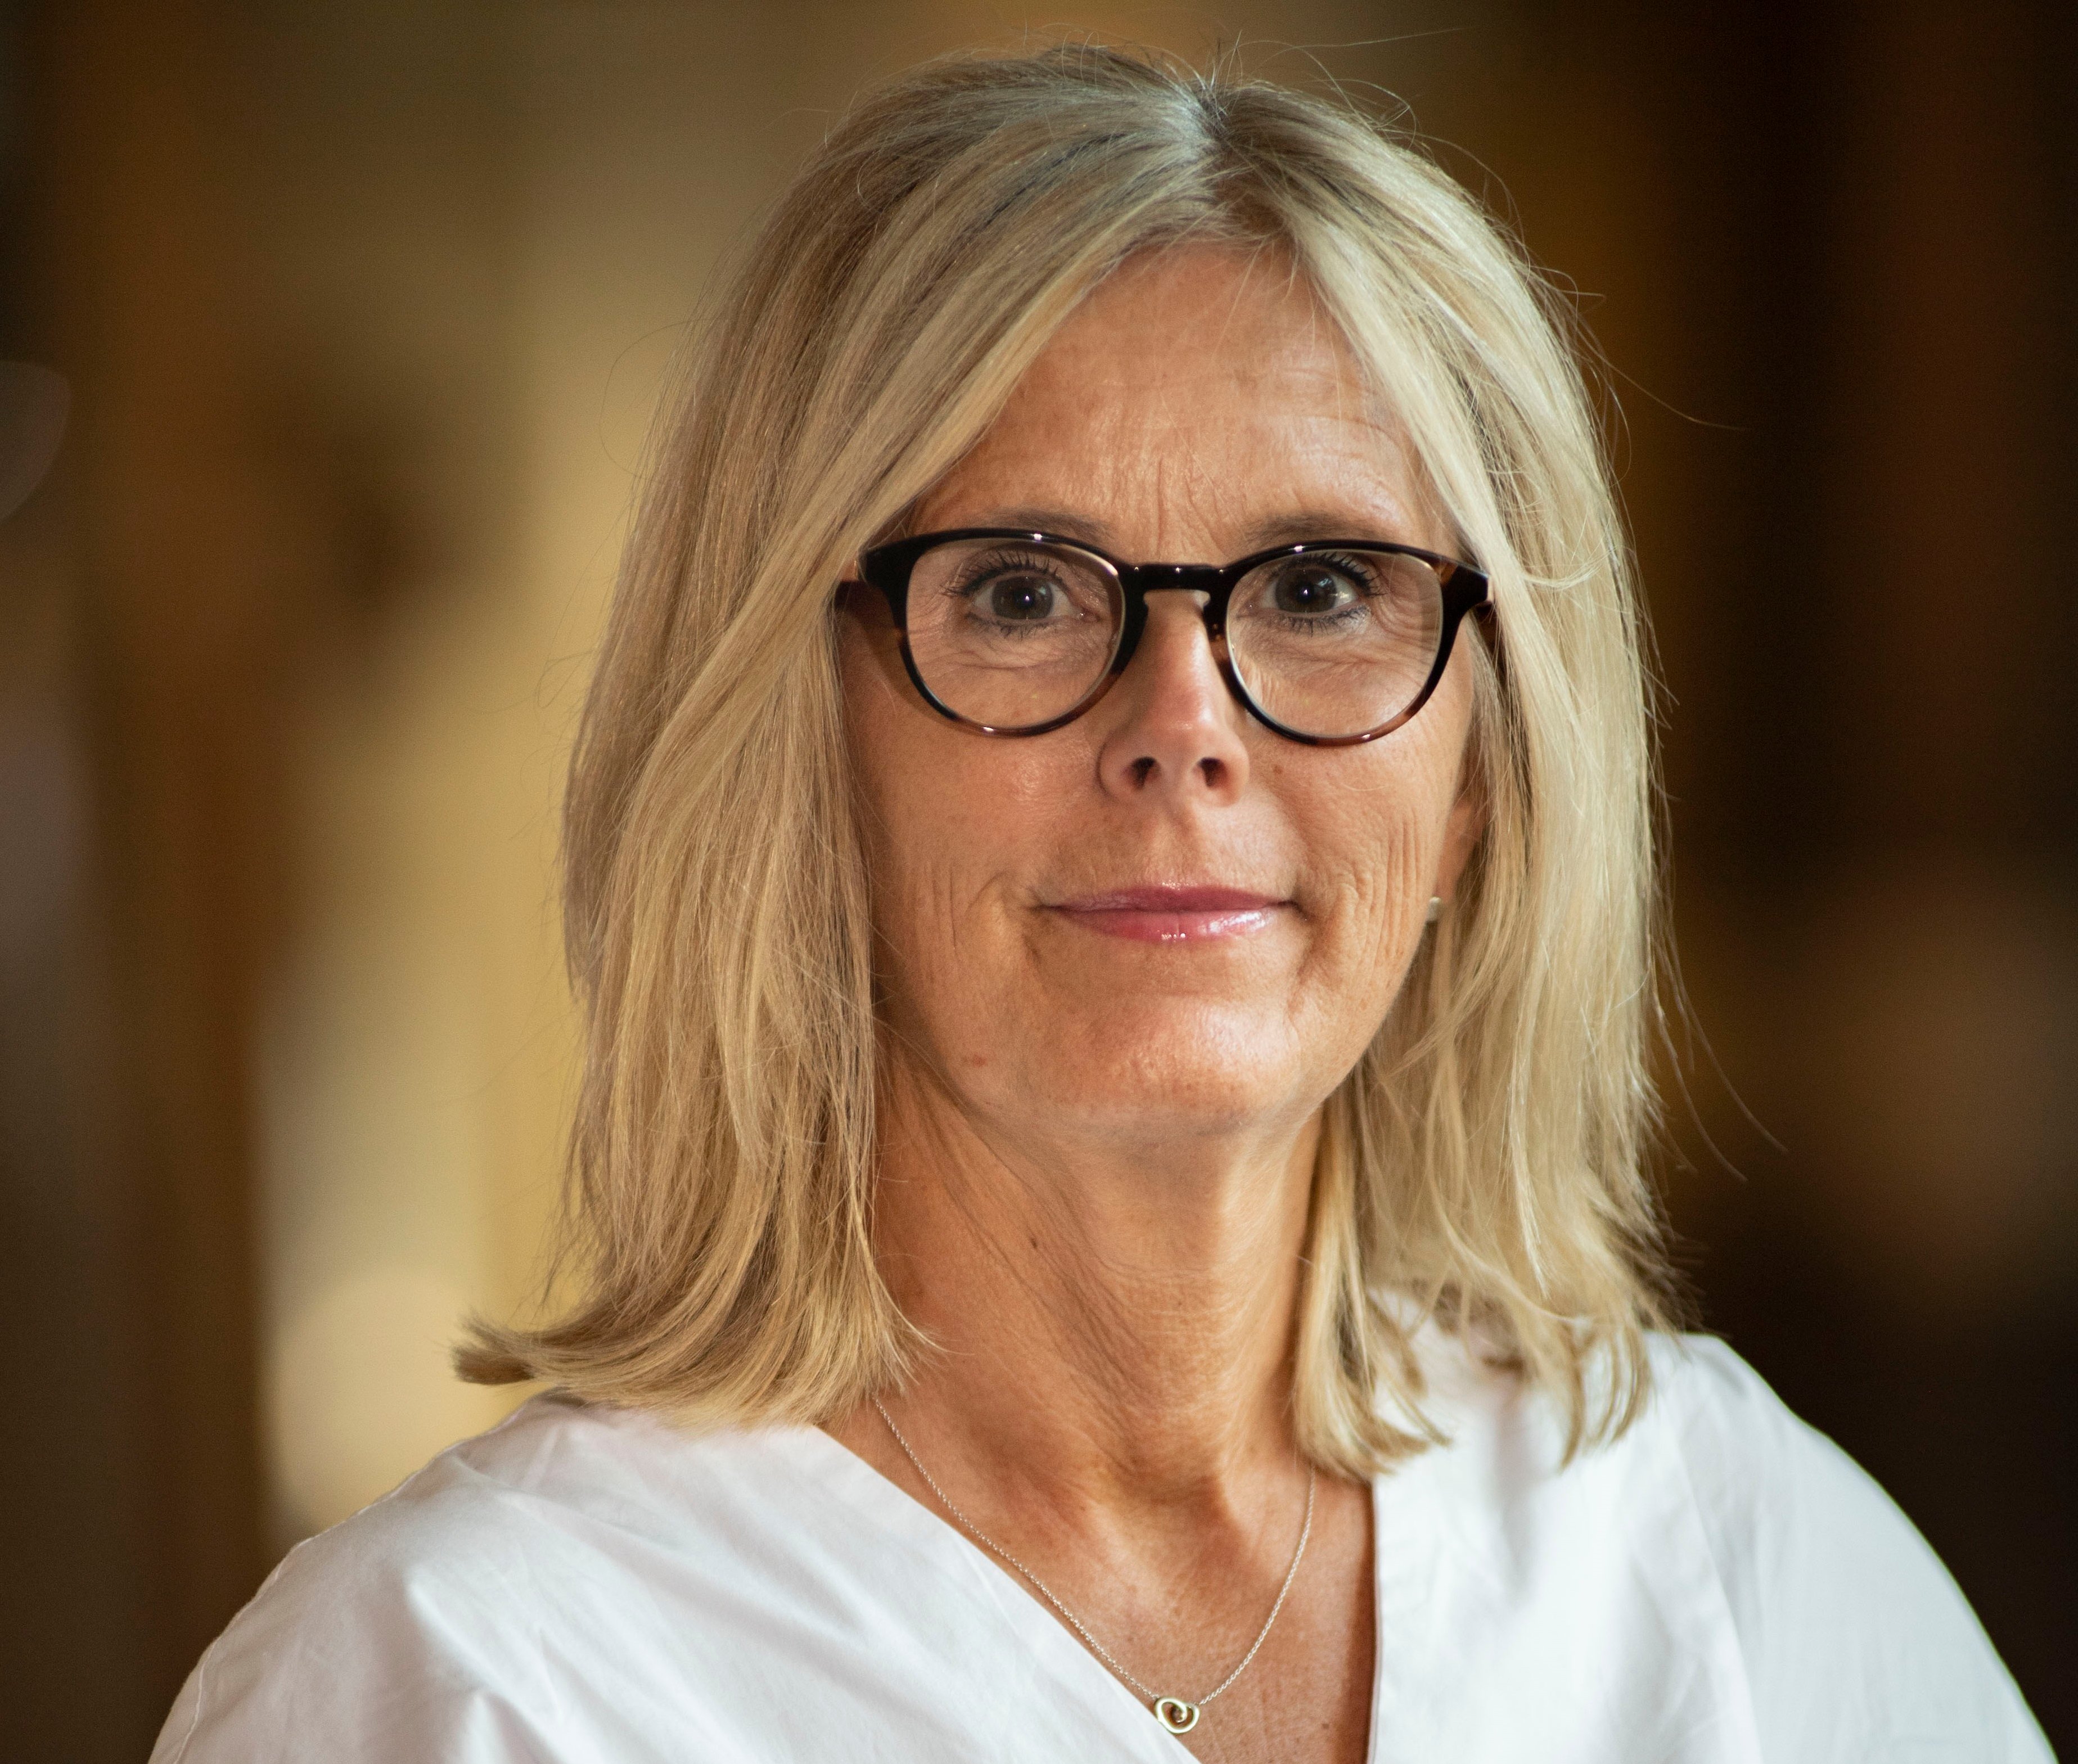 I am Doctor of Philosophy (PhD) in the subject area of Carin Sciences, esp. Nursing Science (2003), an Associate Professor in Perioperative Nursing (2009) and a Professor in Nursing 2012-2018 at Örebro University. I am Doctor of Philosophy (PhD) in the subject area of Carin Sciences, esp. Nursing Science (2003), an Associate Professor in Perioperative Nursing (2009) and a Professor in Nursing 2012-2018 at Ã–rebro University. I am Doctor of Philosophy (PhD) in the subject area of Carin Sciences, esp. Nursing Science (2003), an Associate Professor in Perioperative Nursing (2009) and a Professor in Nursing 2012-2018 at Örebro University.